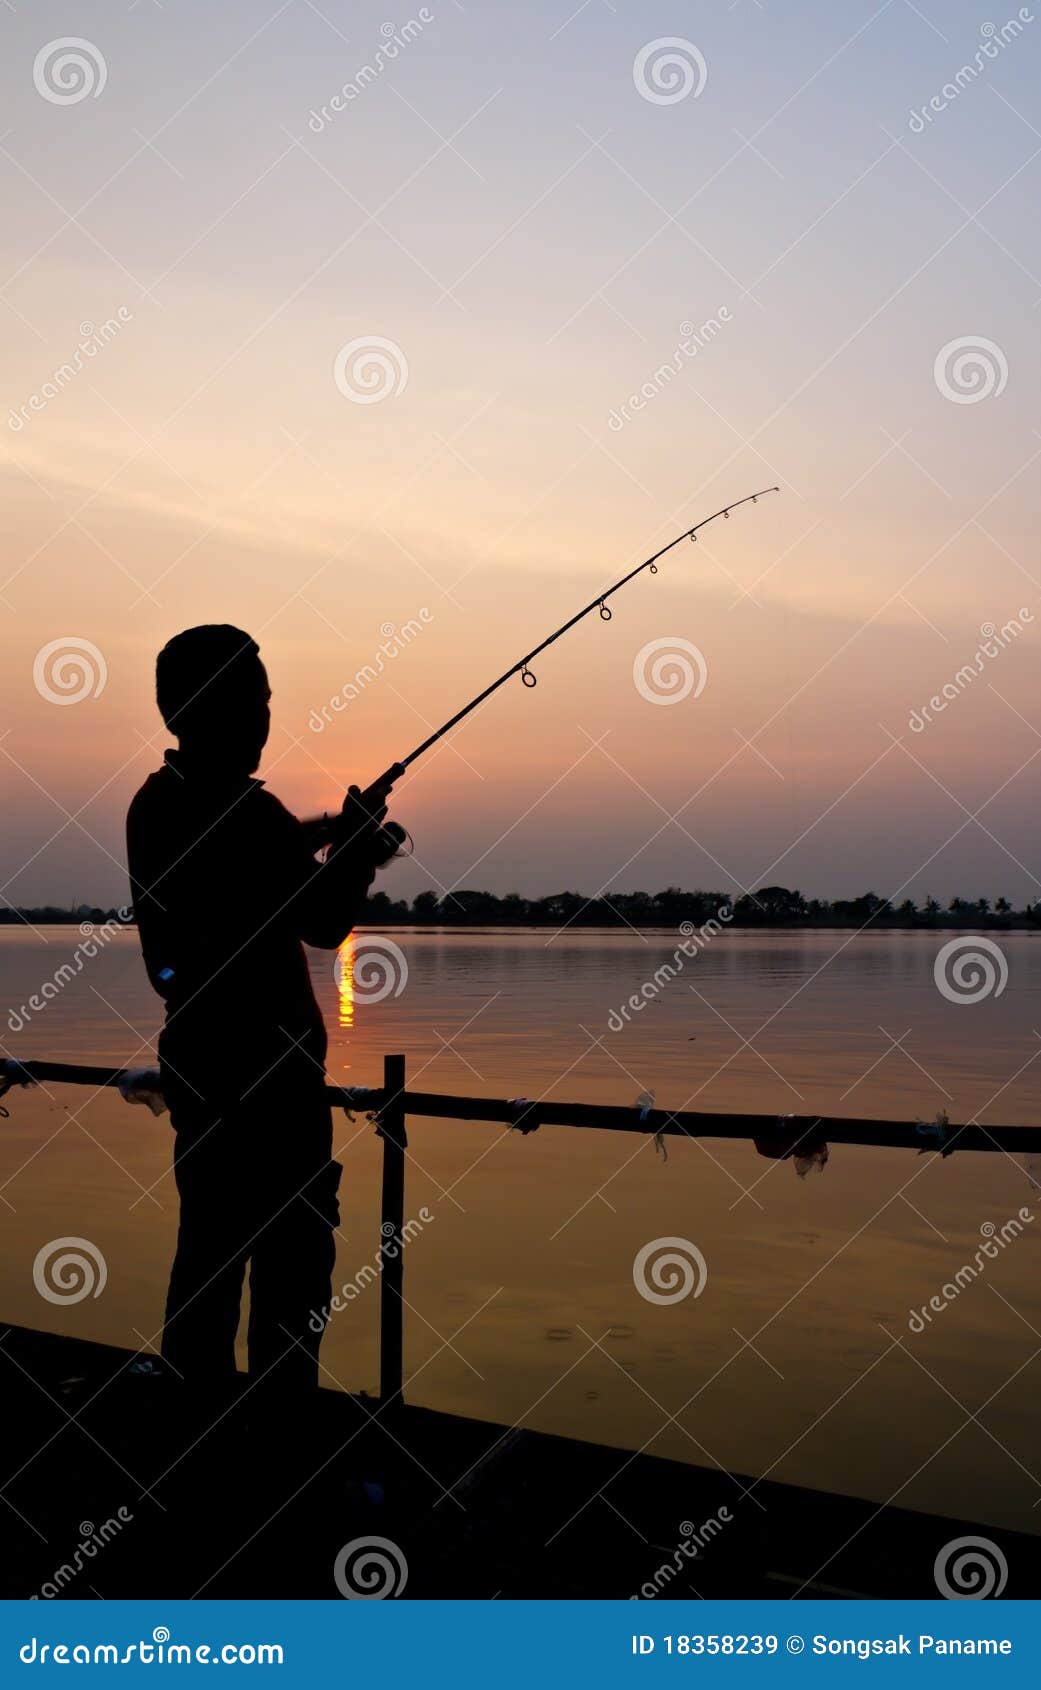 Silhouette Of A Man Fishing Stock Image - Image of hook 